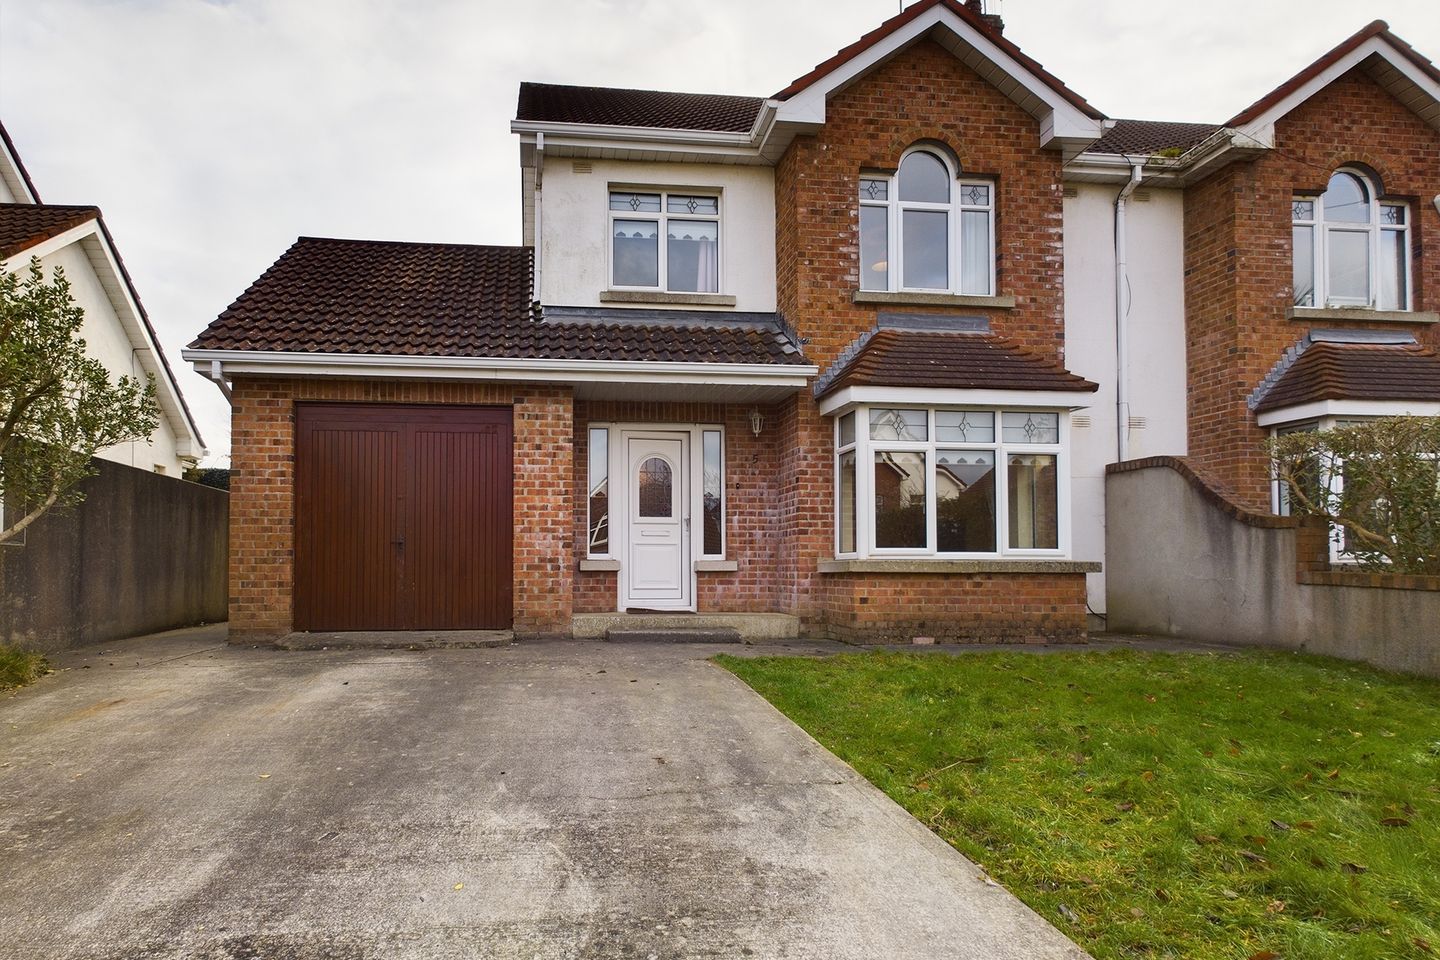 5 Beech Avenue, Monvoy Valley, Tramore, Co. Waterford